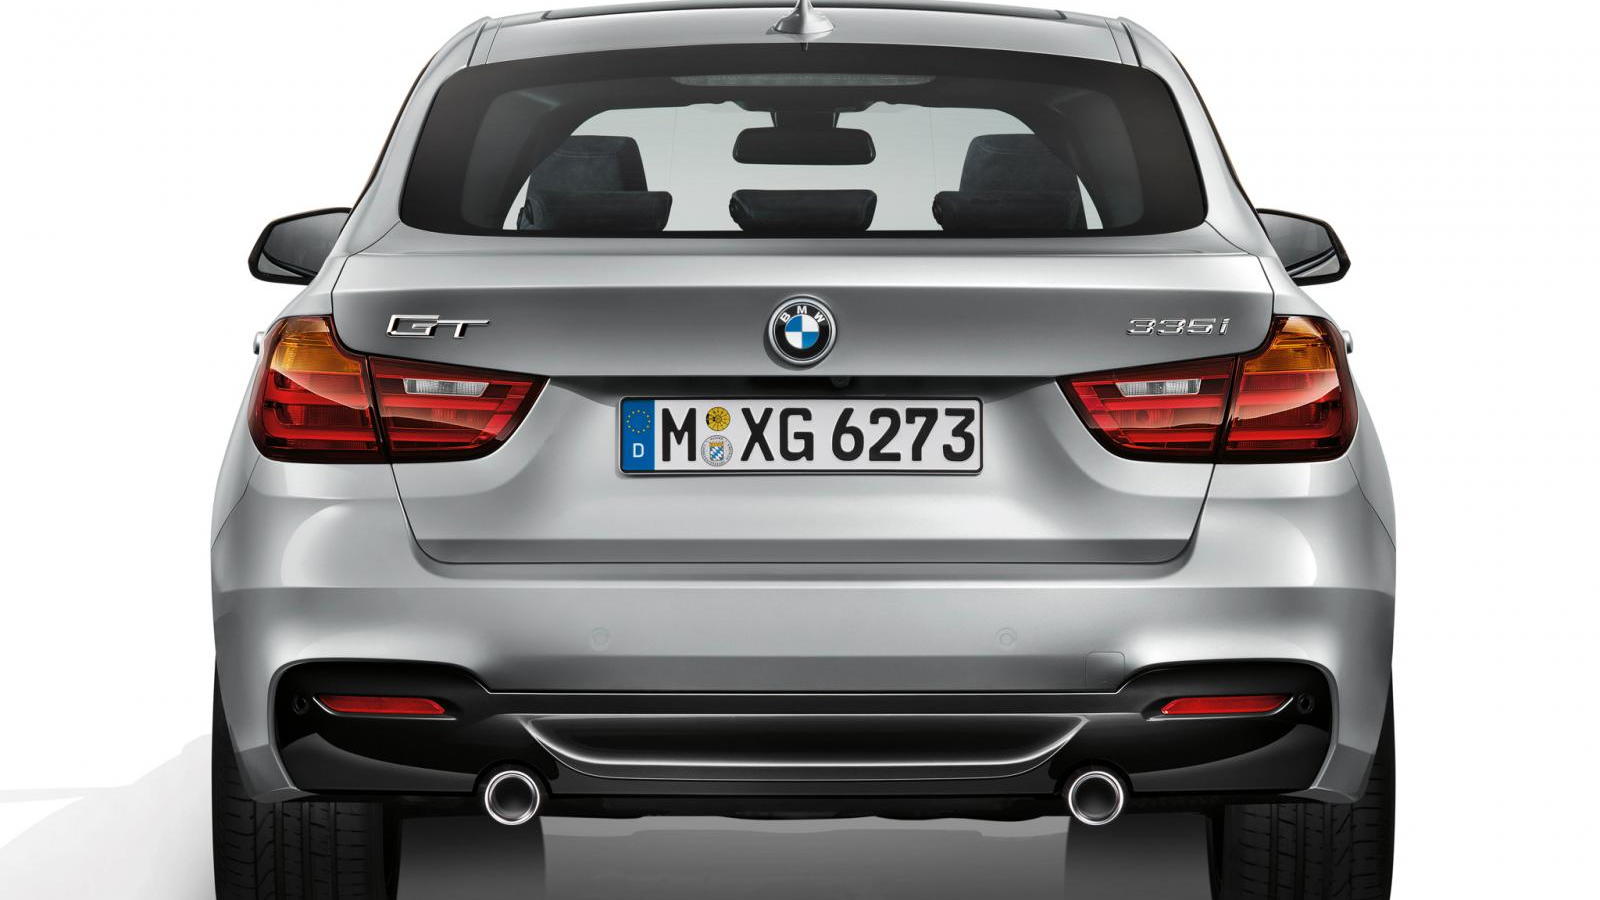 Leaked images of the BMW 3 Series Gran Turismo